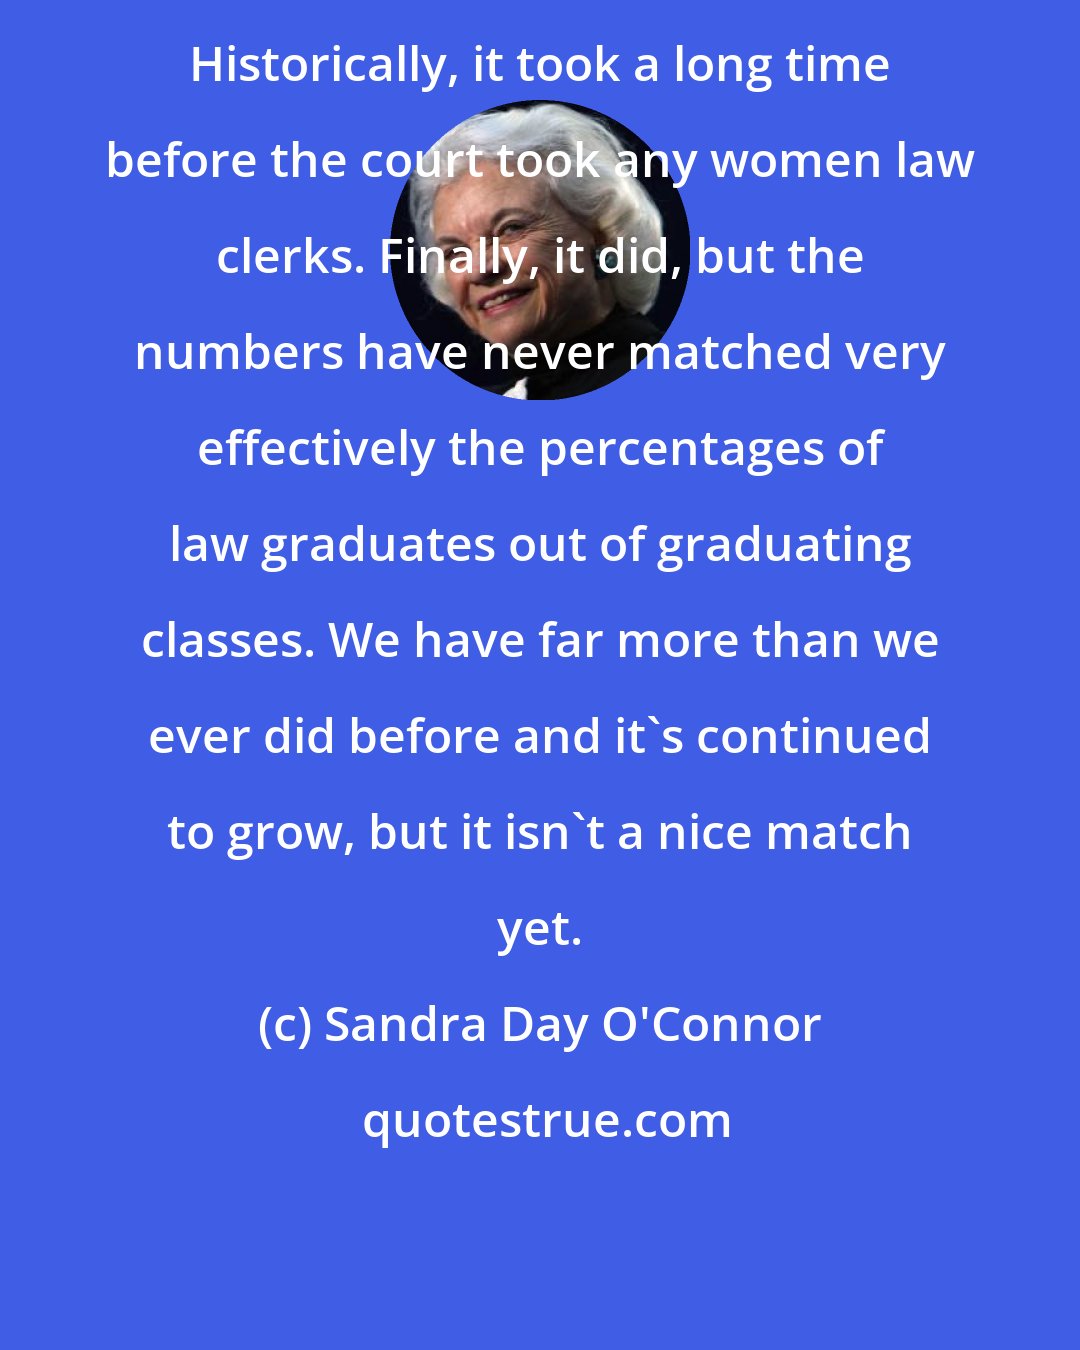 Sandra Day O'Connor: Historically, it took a long time before the court took any women law clerks. Finally, it did, but the numbers have never matched very effectively the percentages of law graduates out of graduating classes. We have far more than we ever did before and it's continued to grow, but it isn't a nice match yet.